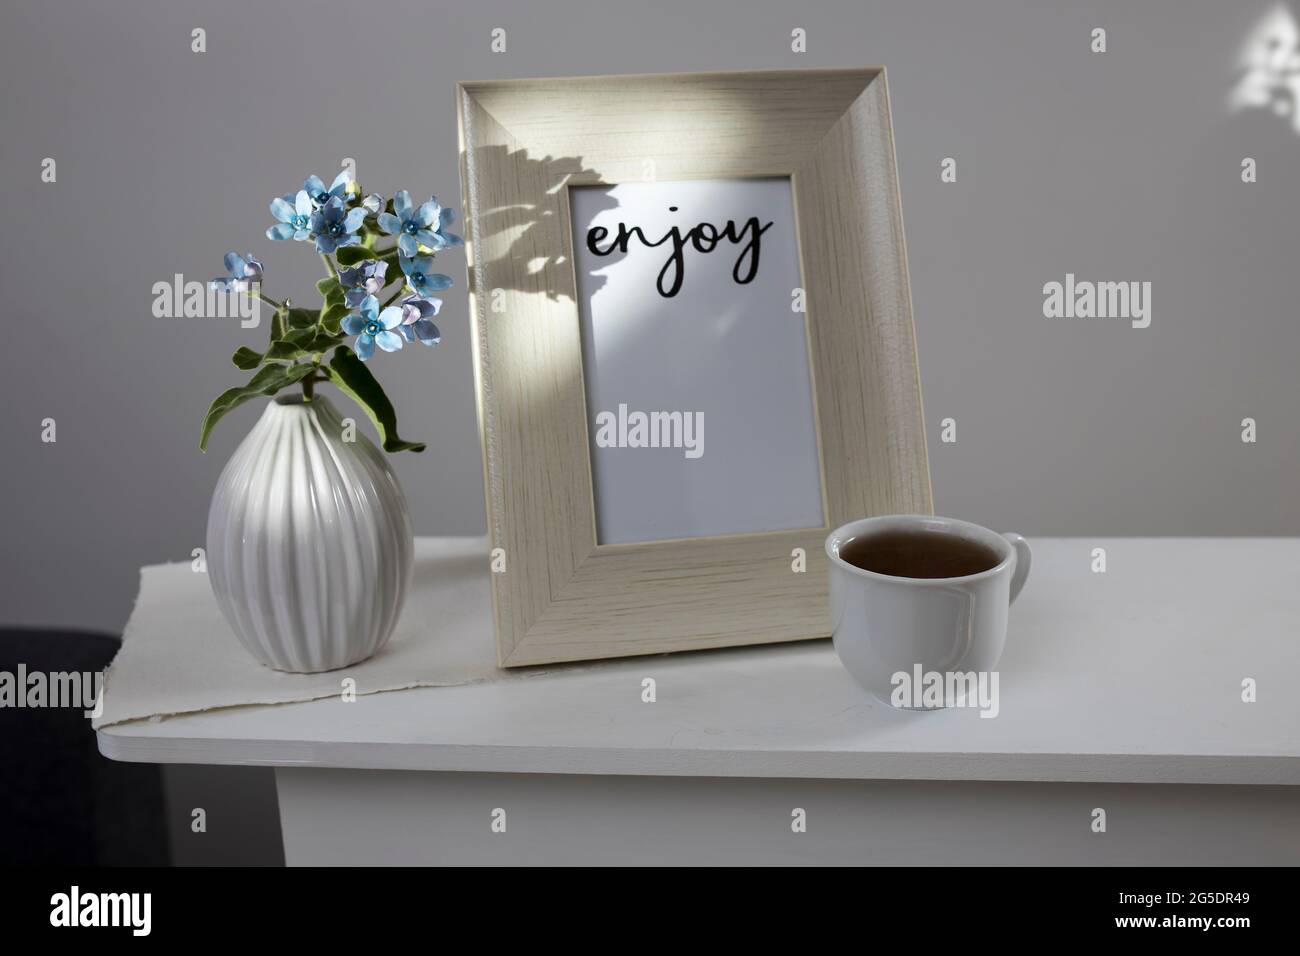 Flower hackelia velutina in a white fluted vase in the style of the seventies, a photo frame with the words Enjoy, and a cup of coffee on the dresser. Stock Photo